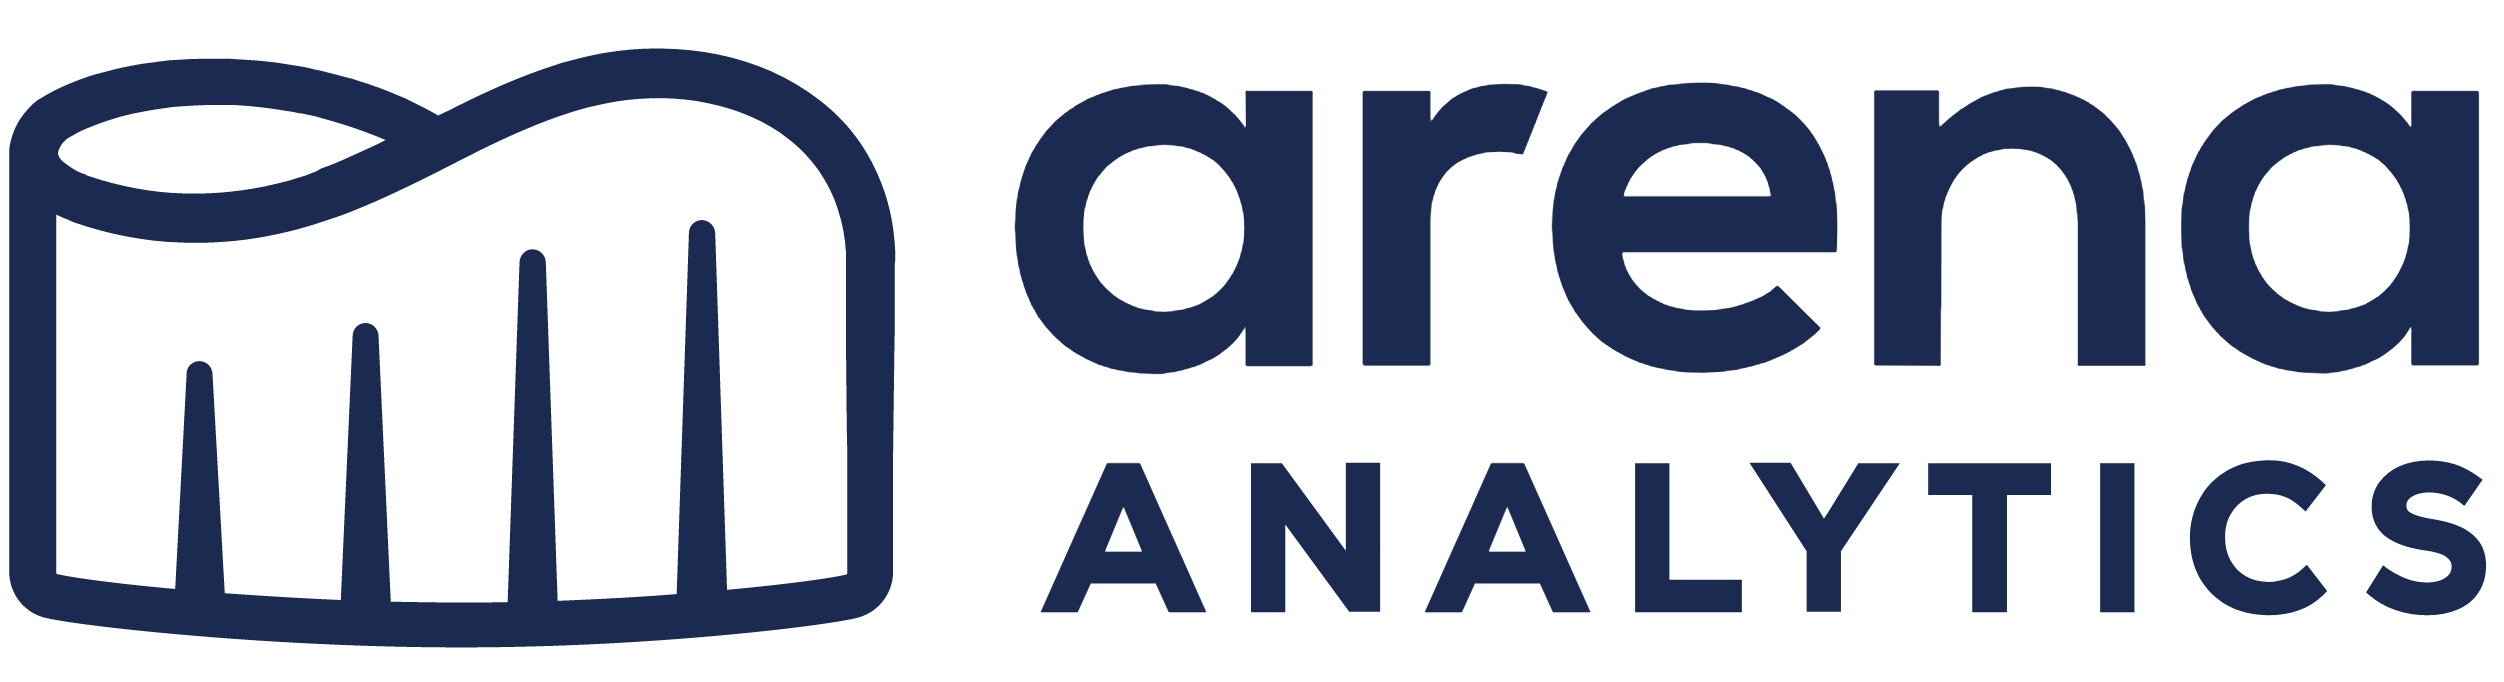 Arena Analytics Uses Data Driven Scrum to Improve Create Client Value